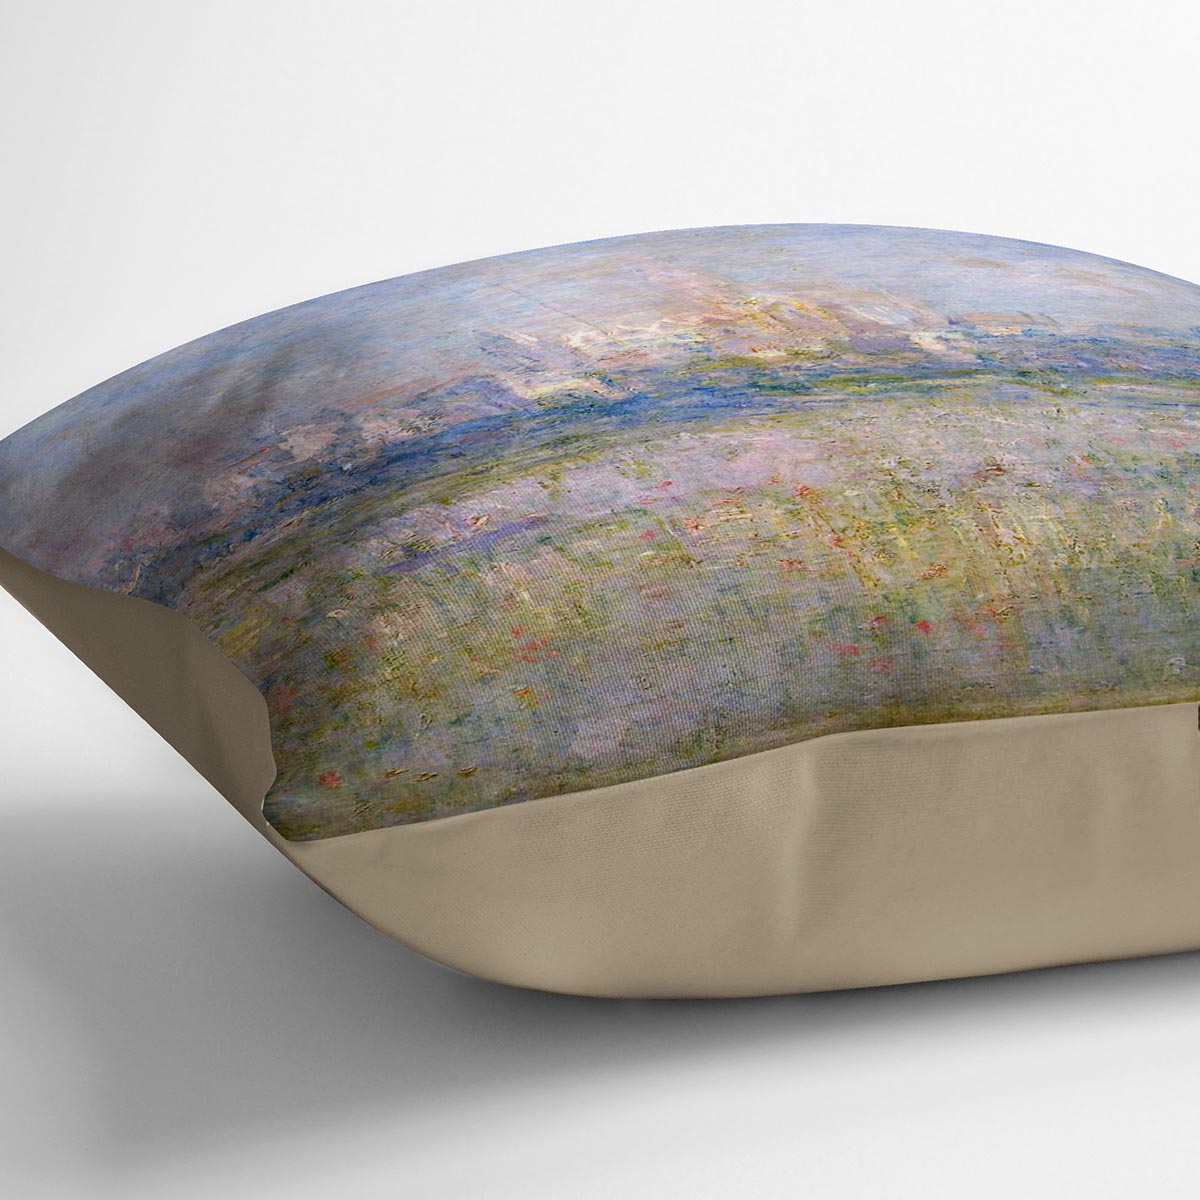 Vctheuil in the fog by Monet Cushion